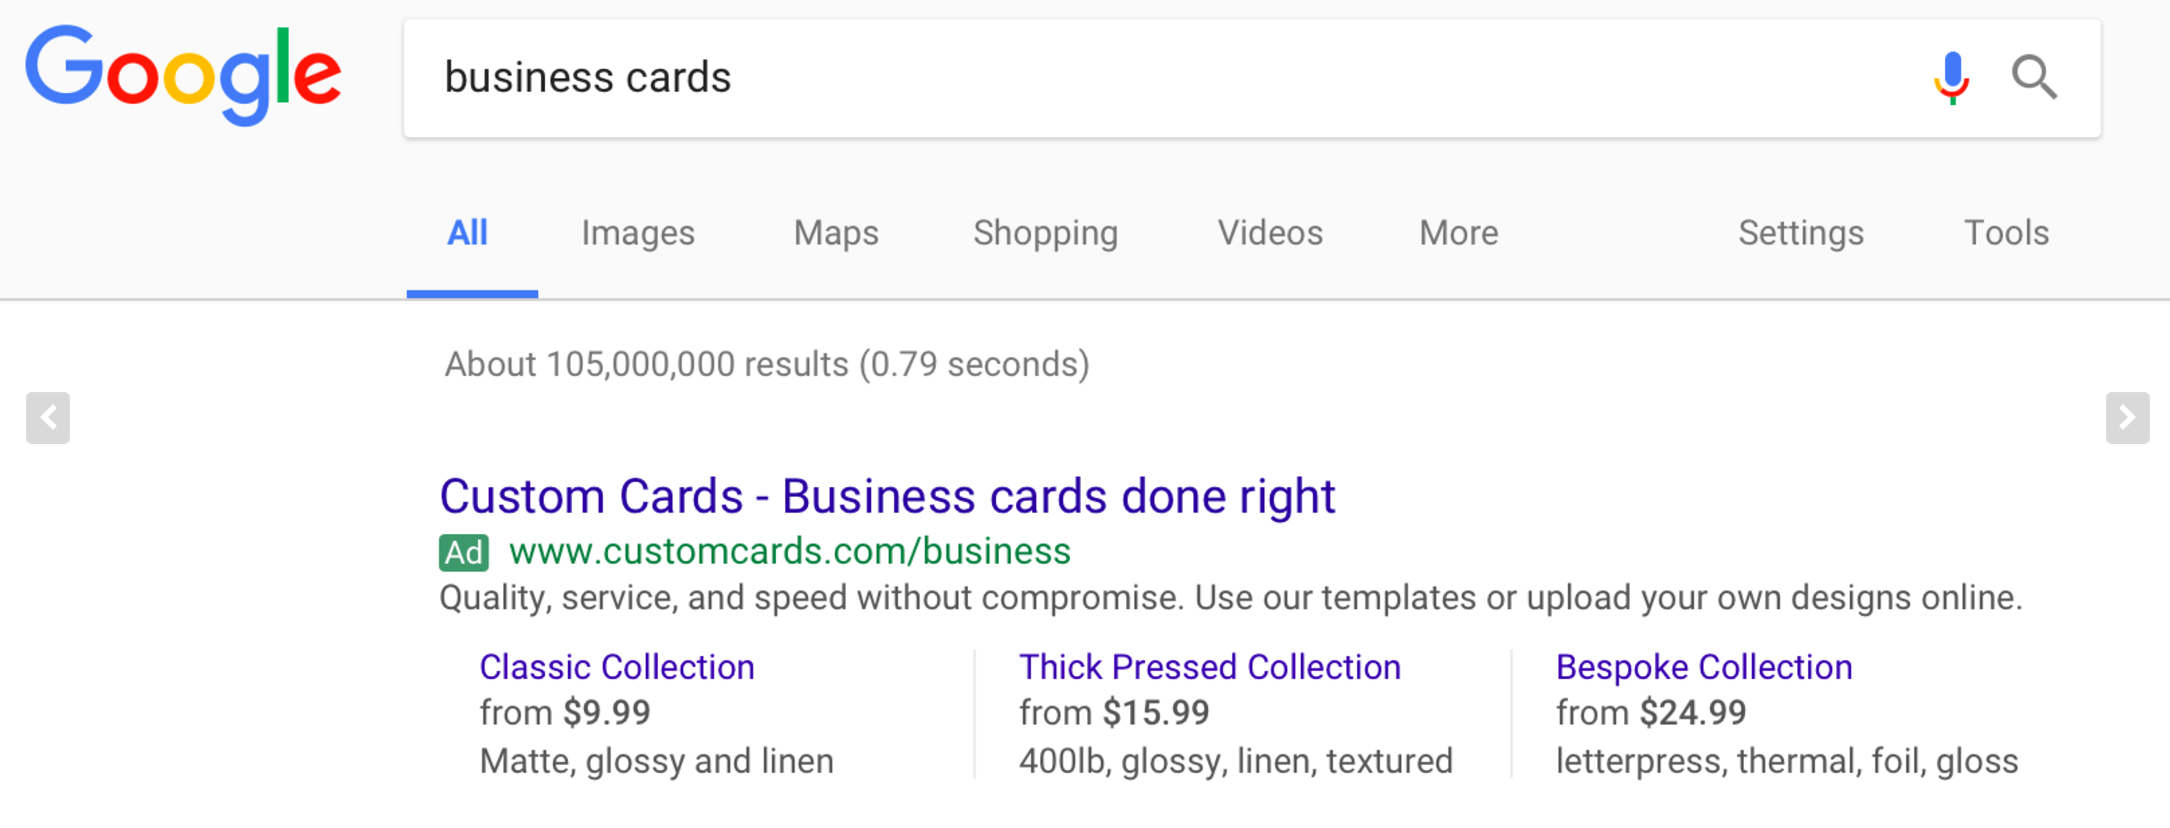 Google AdWords Price Extensions to be Shown on All Devices